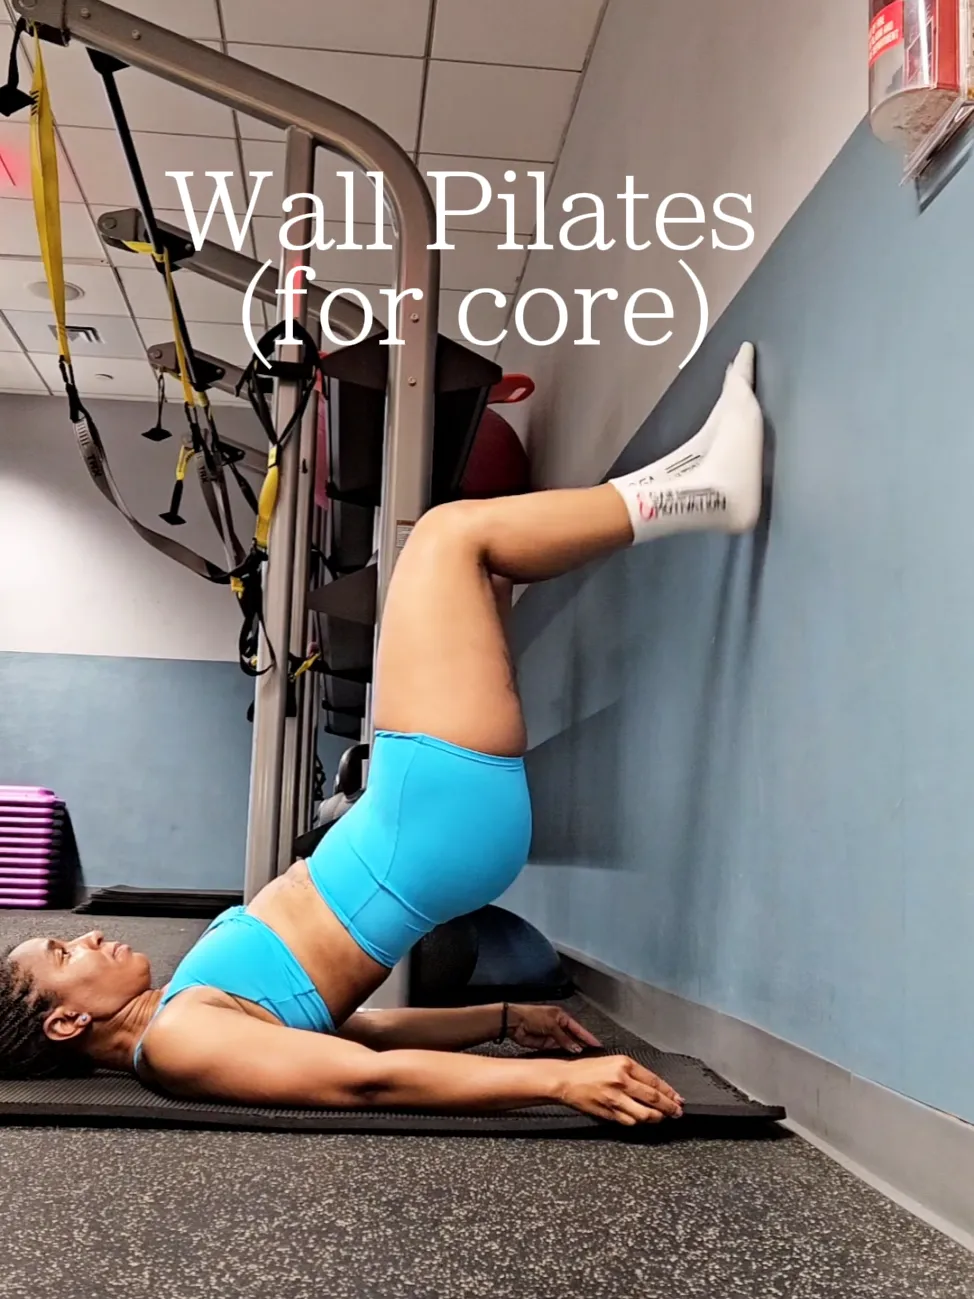 Pilates has completely transformed my body in 2 months : r/pilates